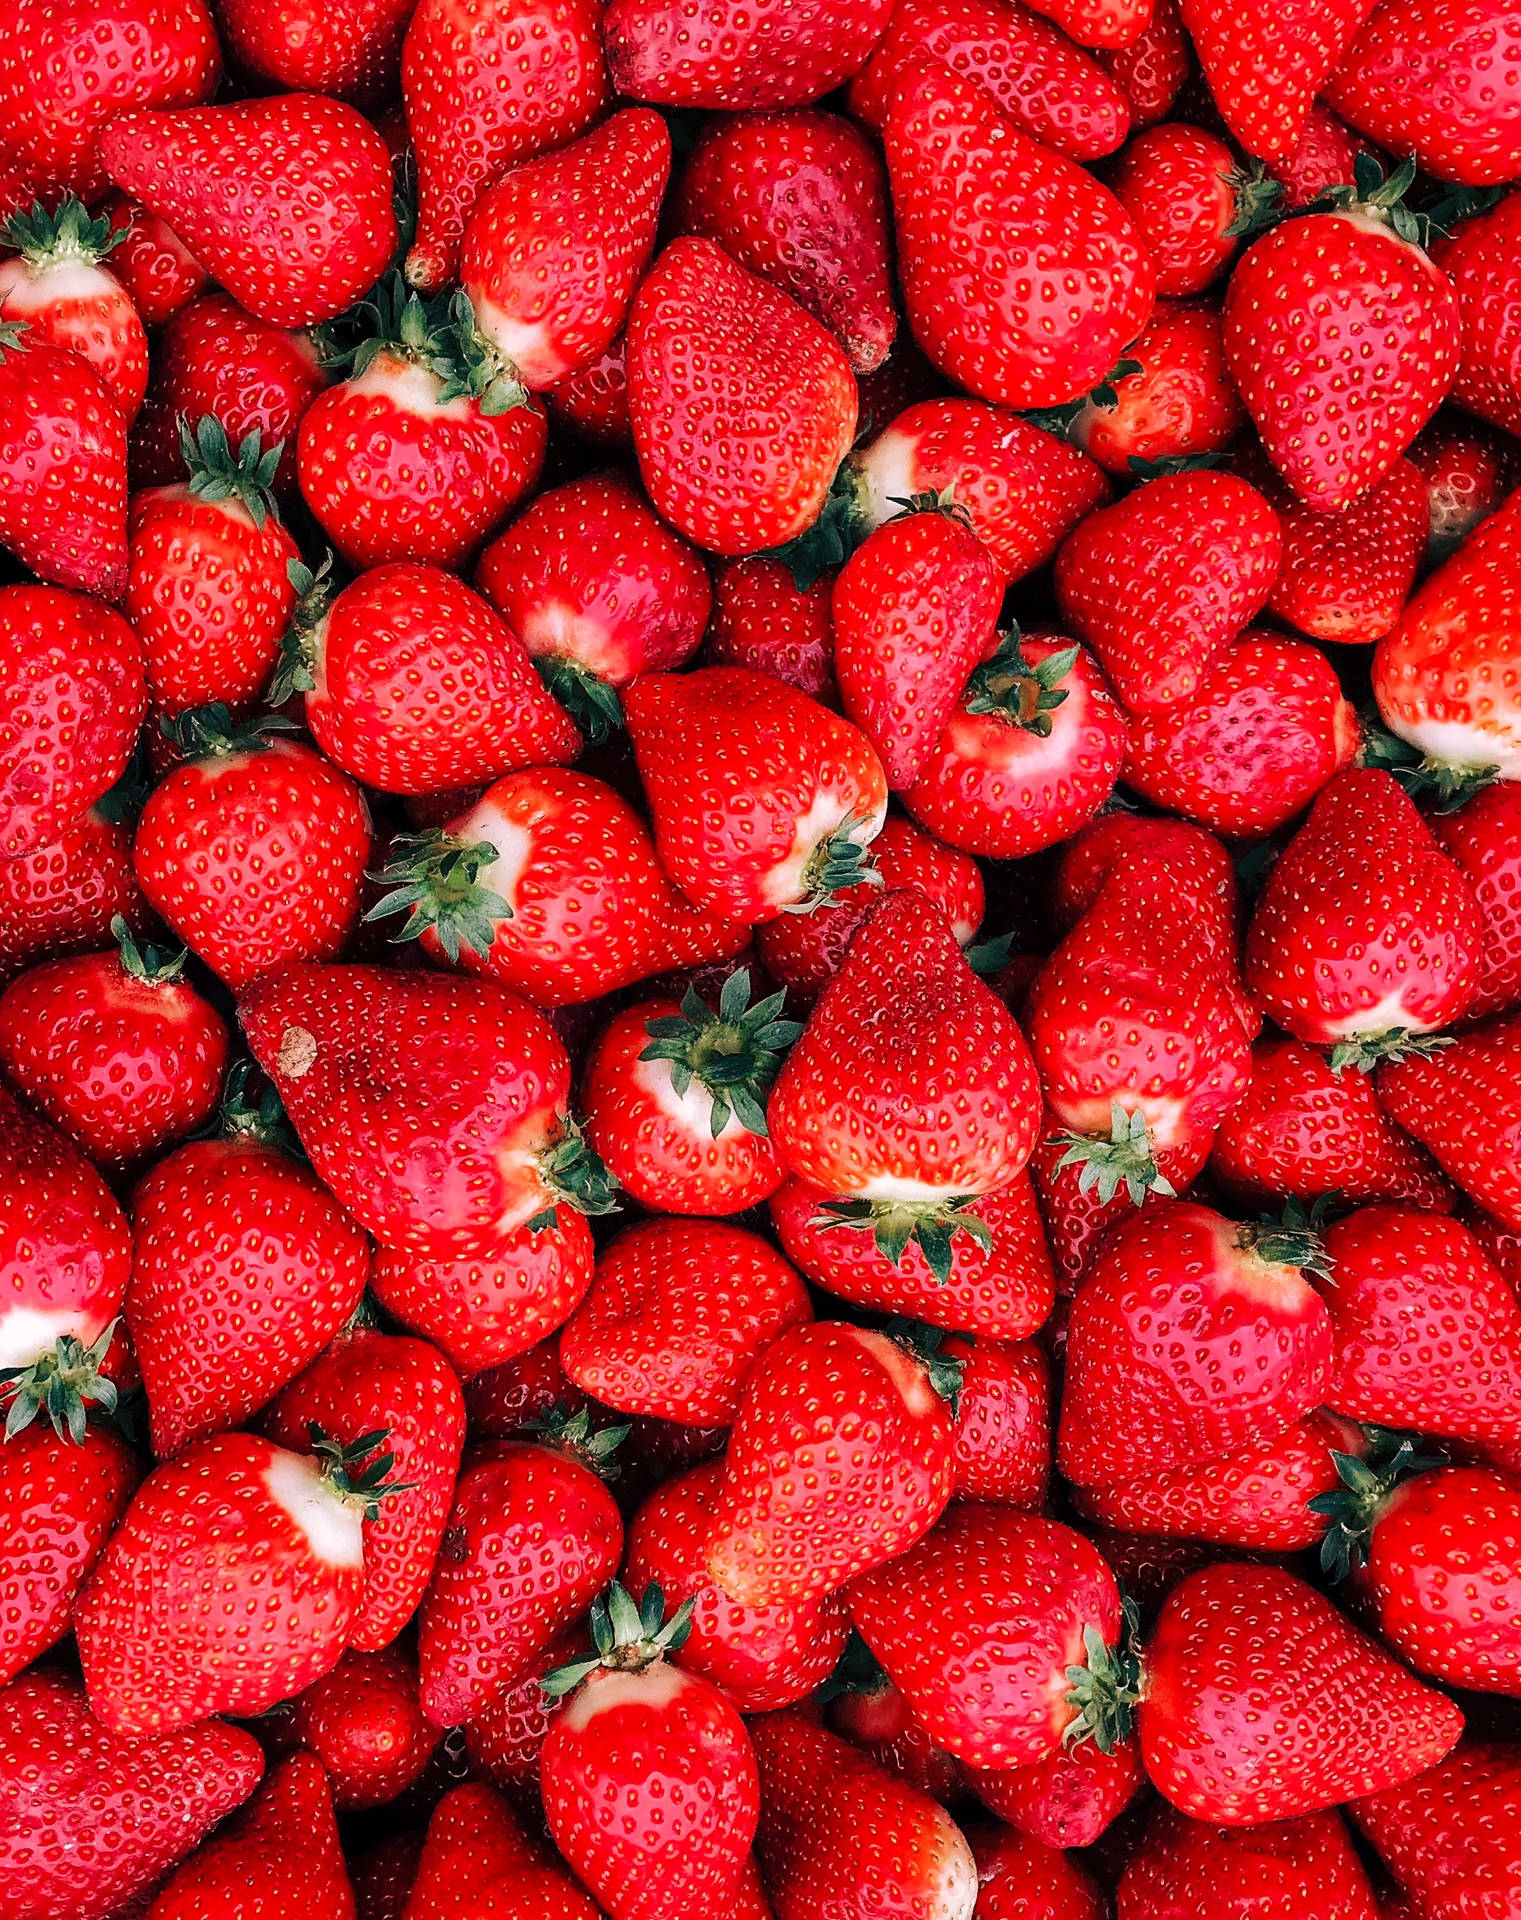 Strawberry 2206X2784 Wallpaper and Background Image